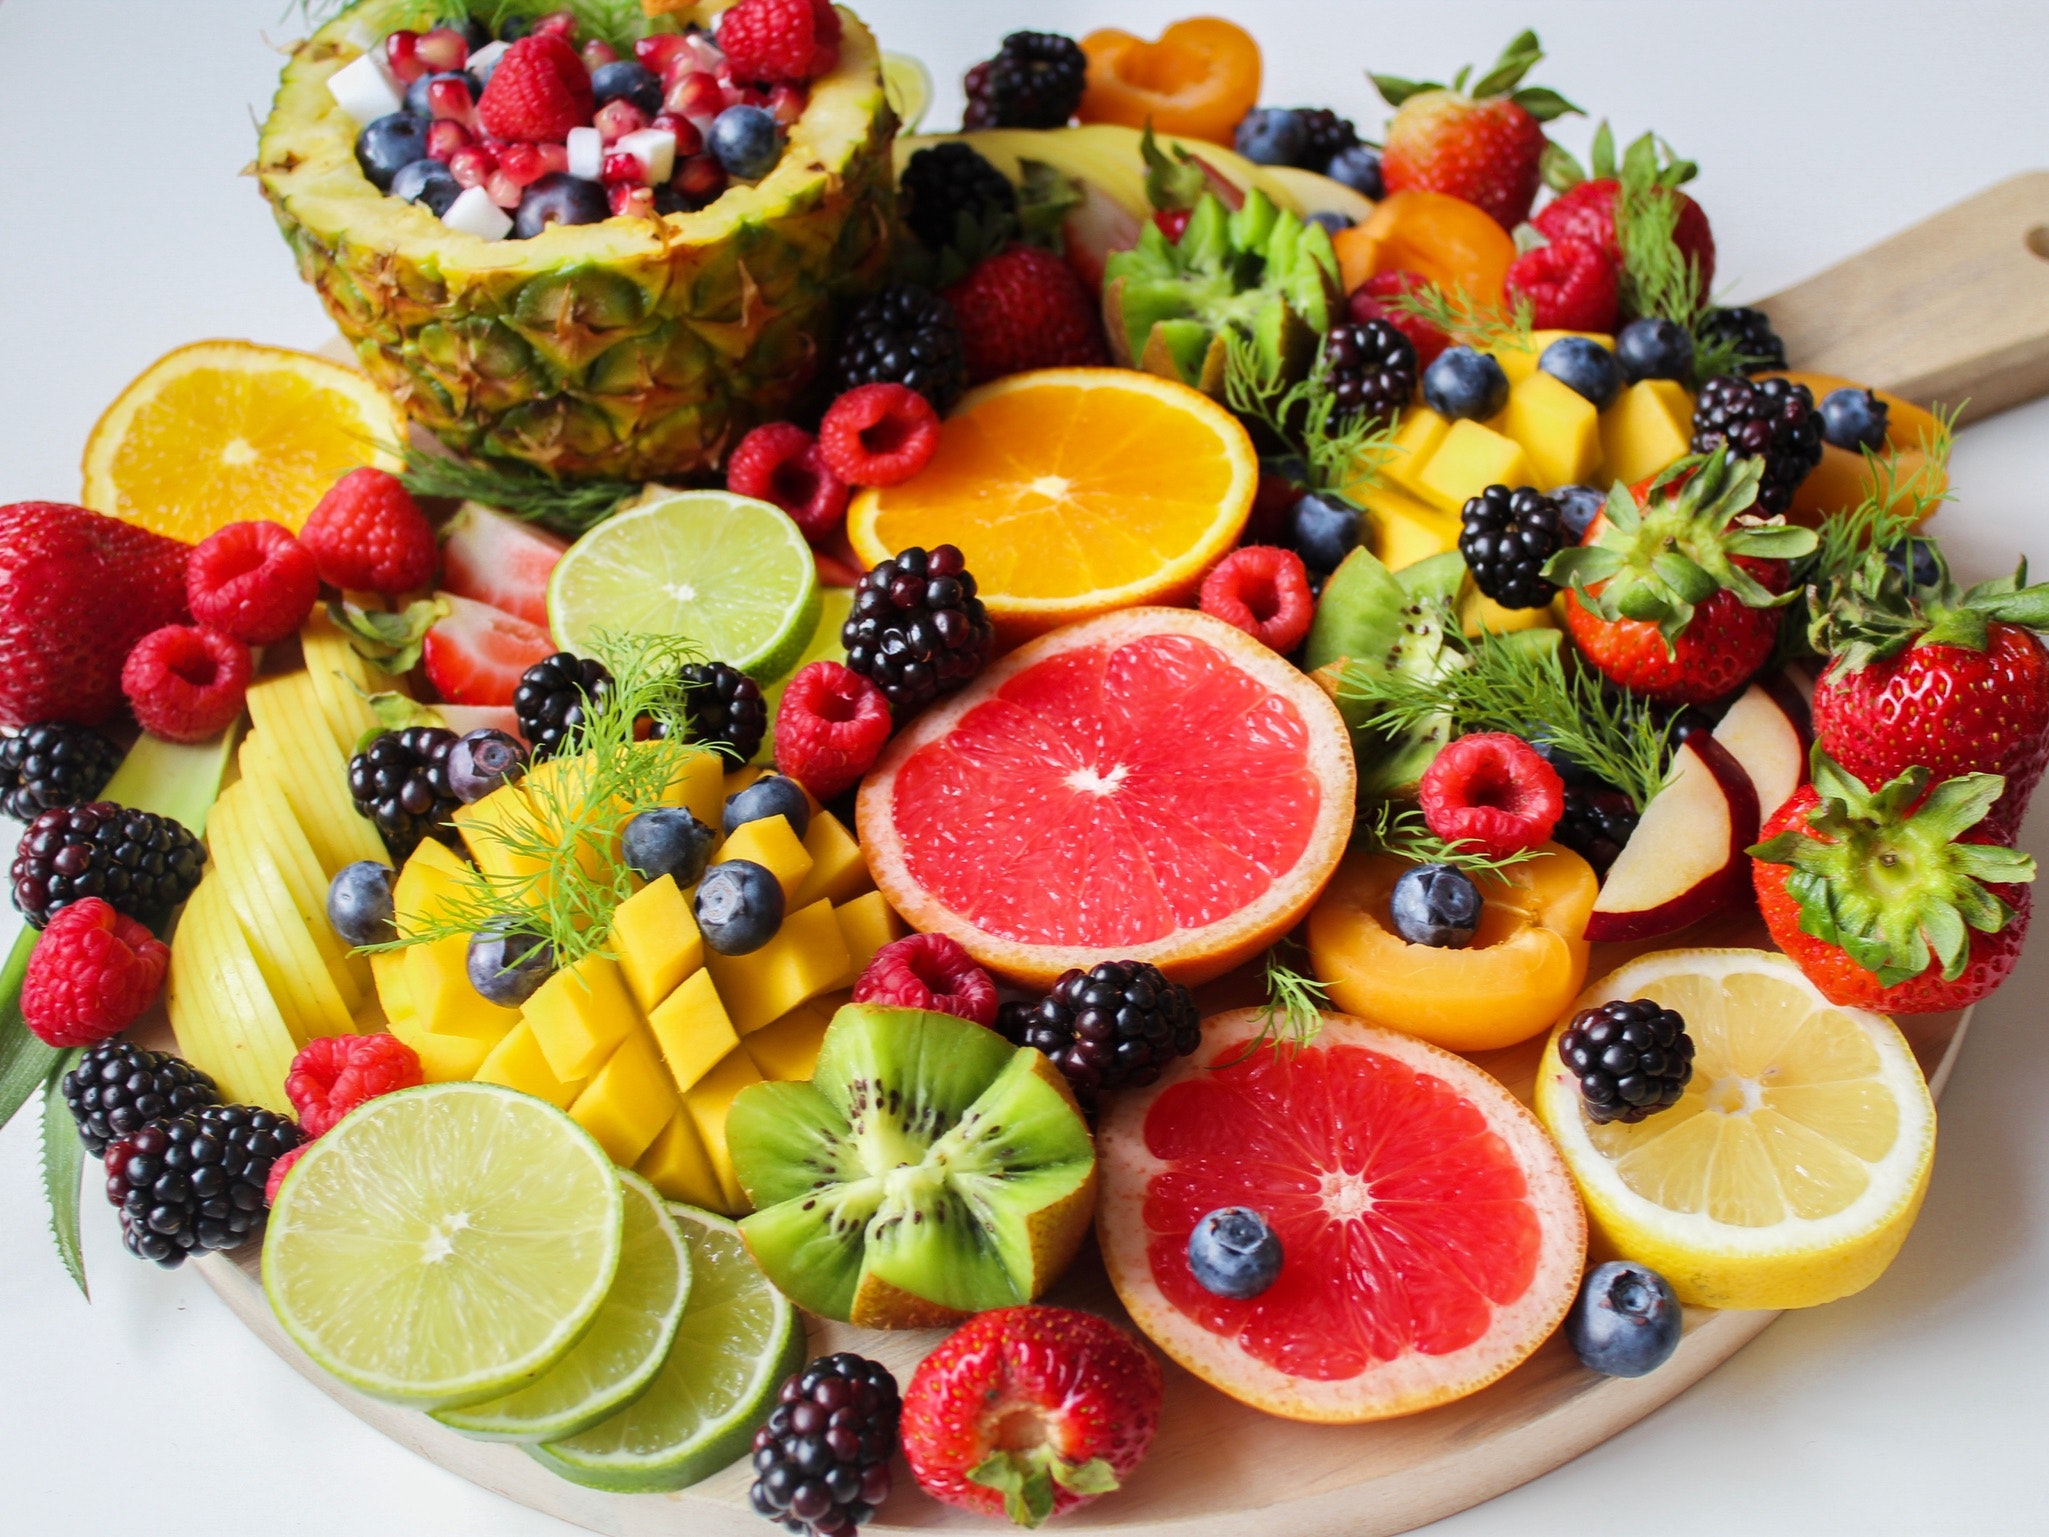 sliced-fruits-on-tray-1132047